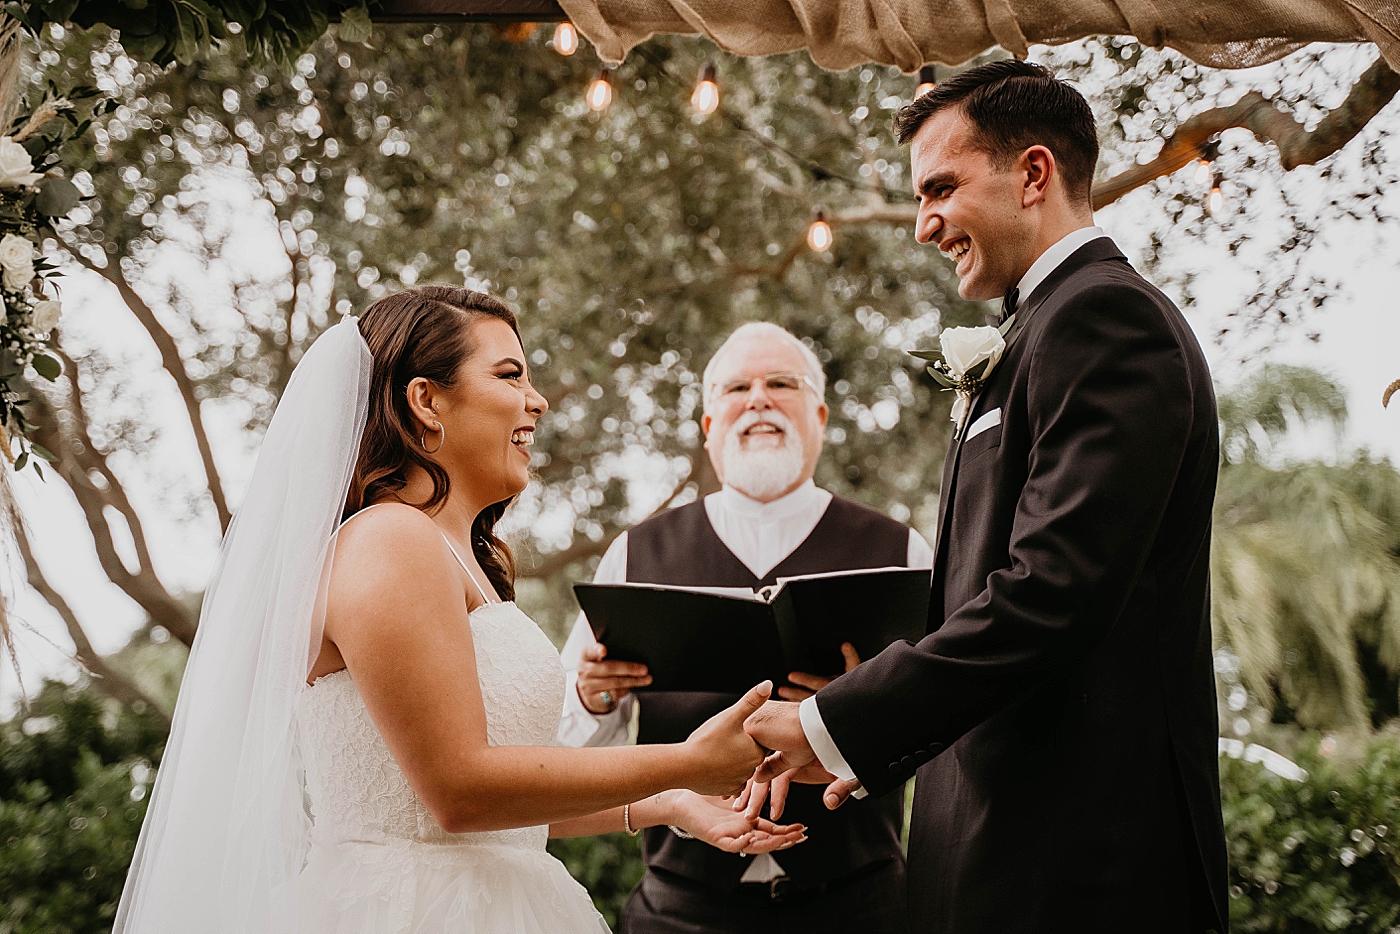 Bride and Groom happy during ceremony Intimate South Florida Wedding Photography captured by Wedding Photographer Krystal Capone Photography